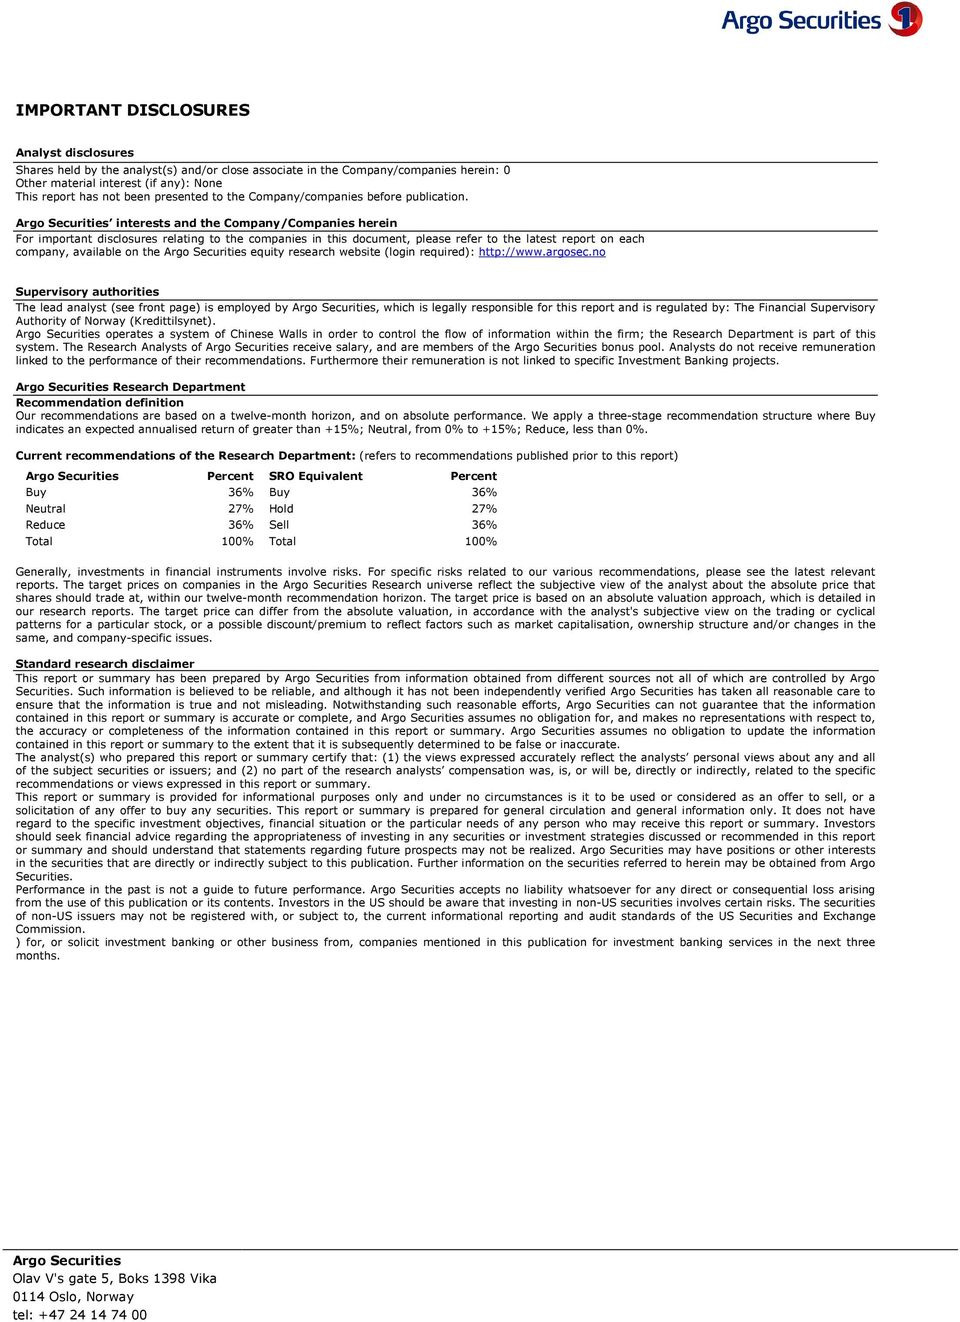 Argo Securities interests and the Company/Companies herein For important disclosures relating to the companies in this document, please refer to the latest report on each company, available on the